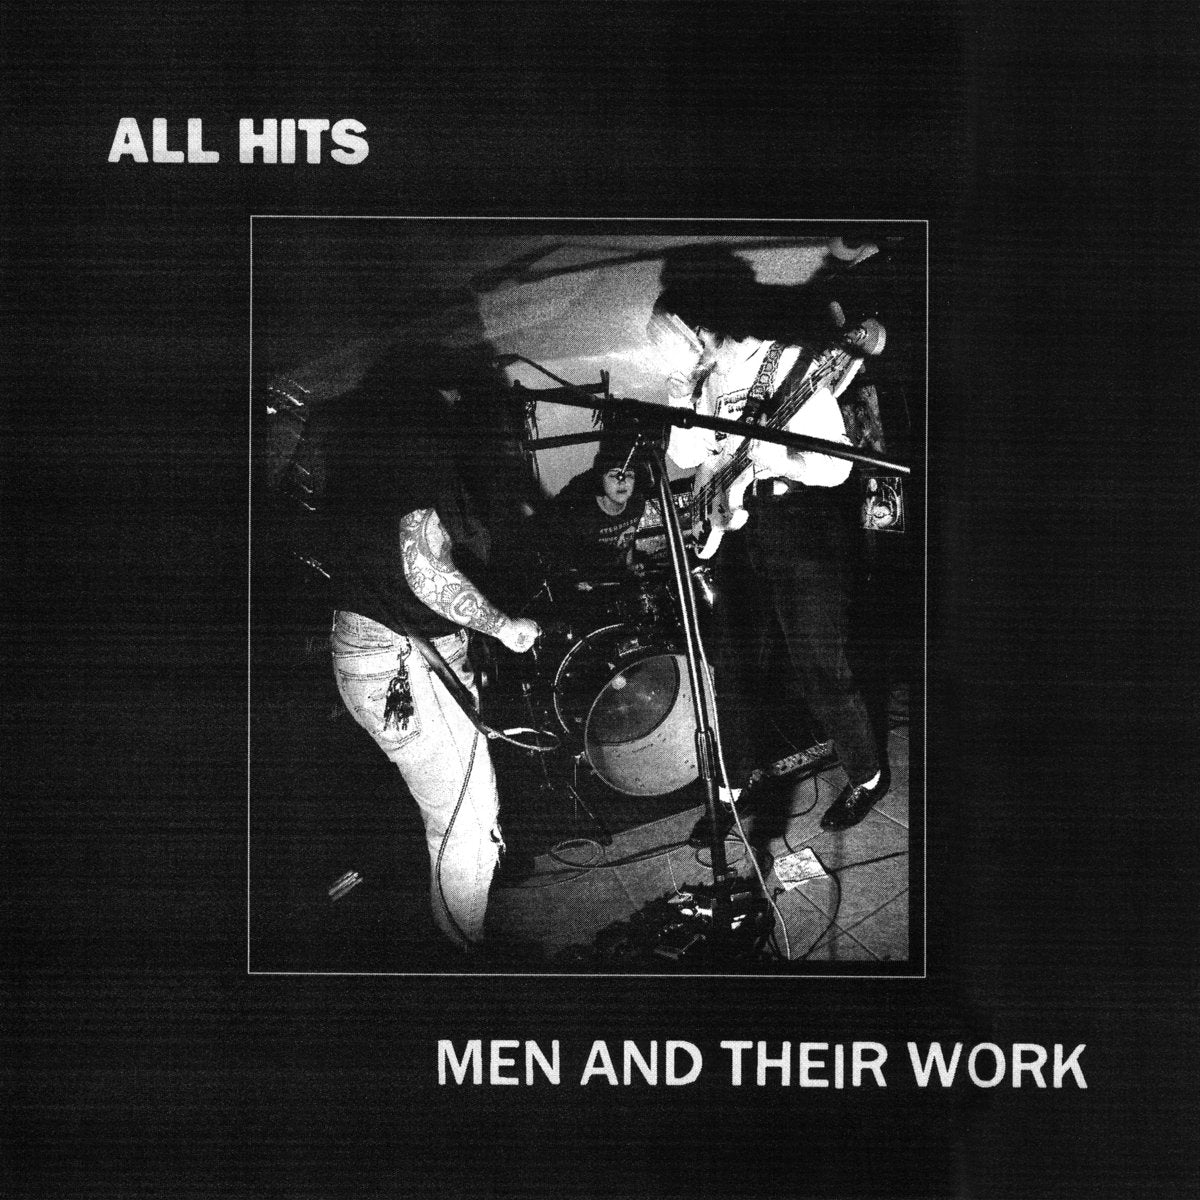 All Hits - Men And Their Work LP - Vinyl - Iron Lung